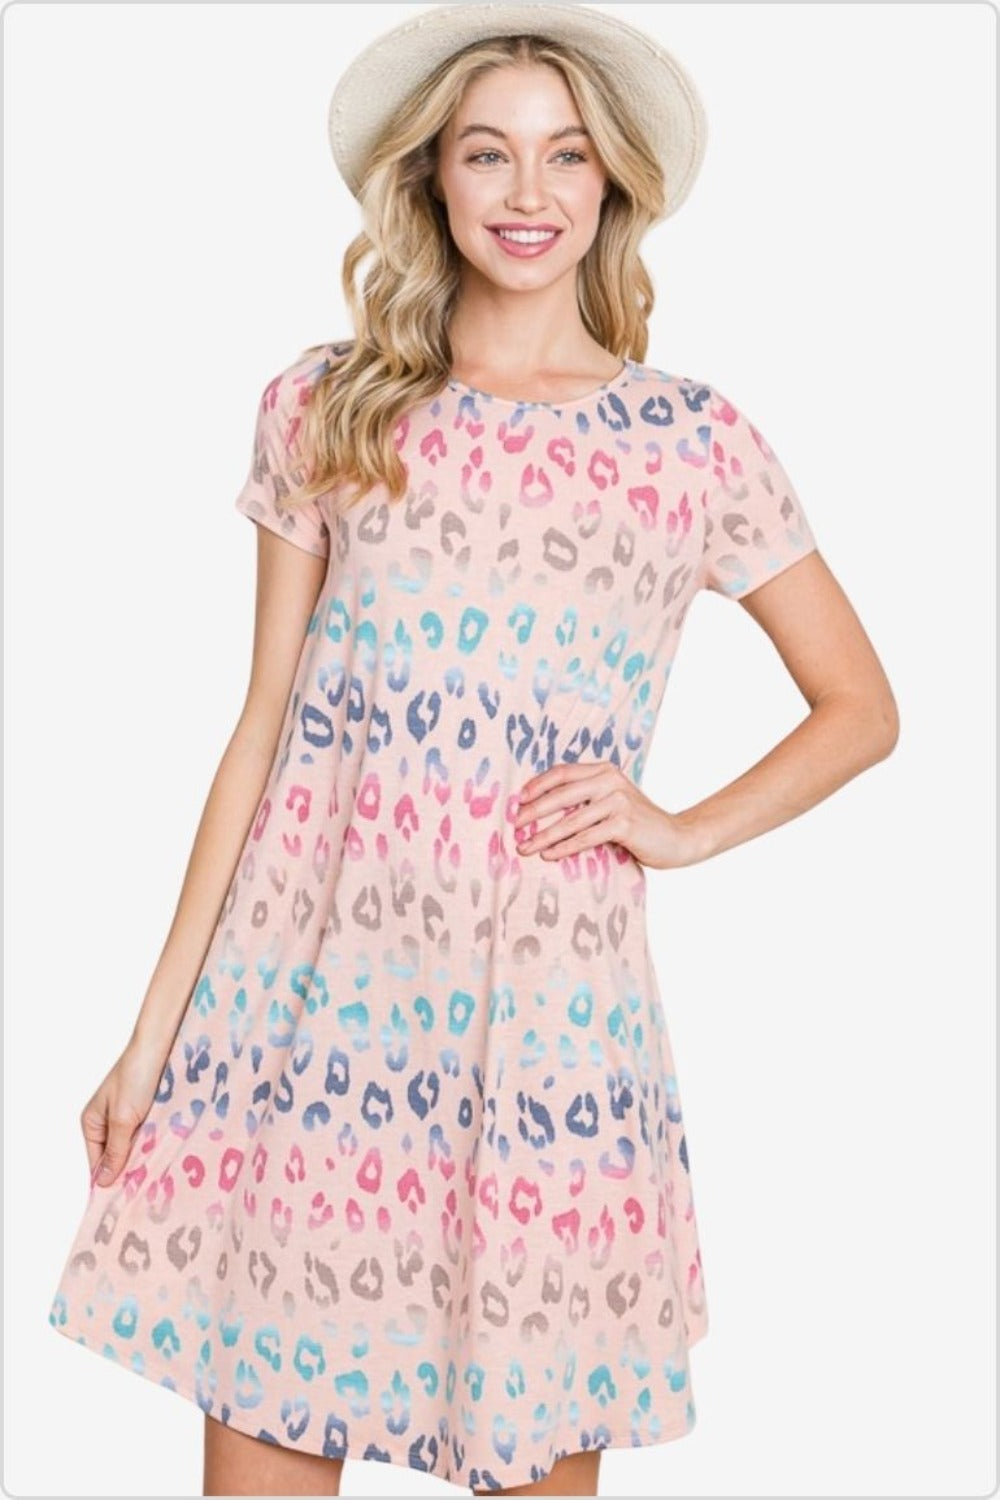 Cheerful woman in a straw hat wearing a pastel-toned leopard print dress with short sleeves, perfect for a summery day out.